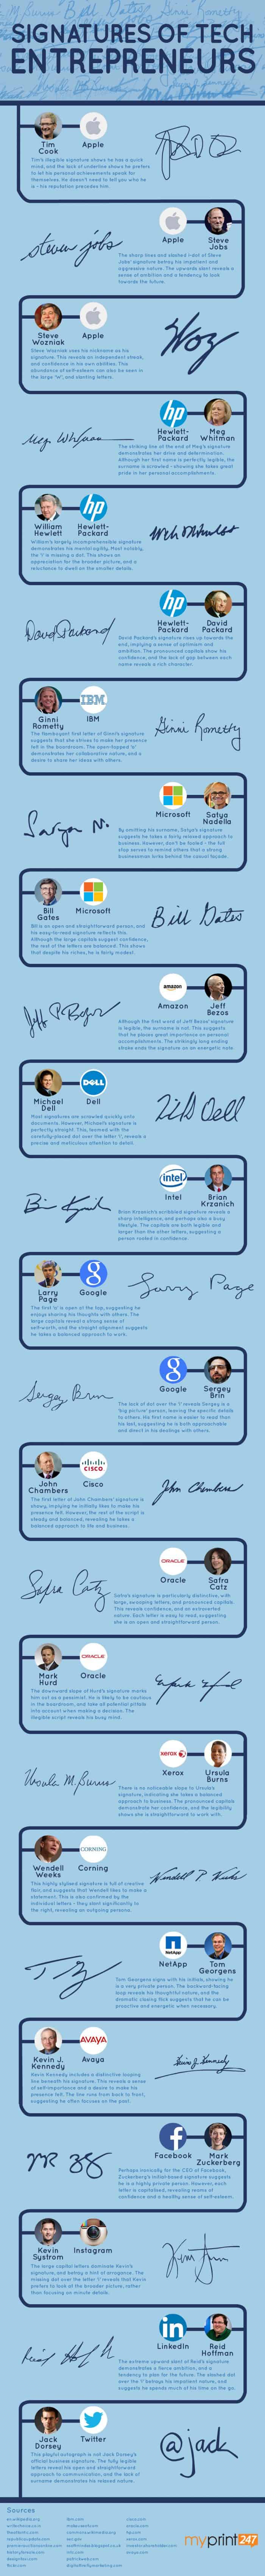 Decoding The Signatures of The World's Top CEOs